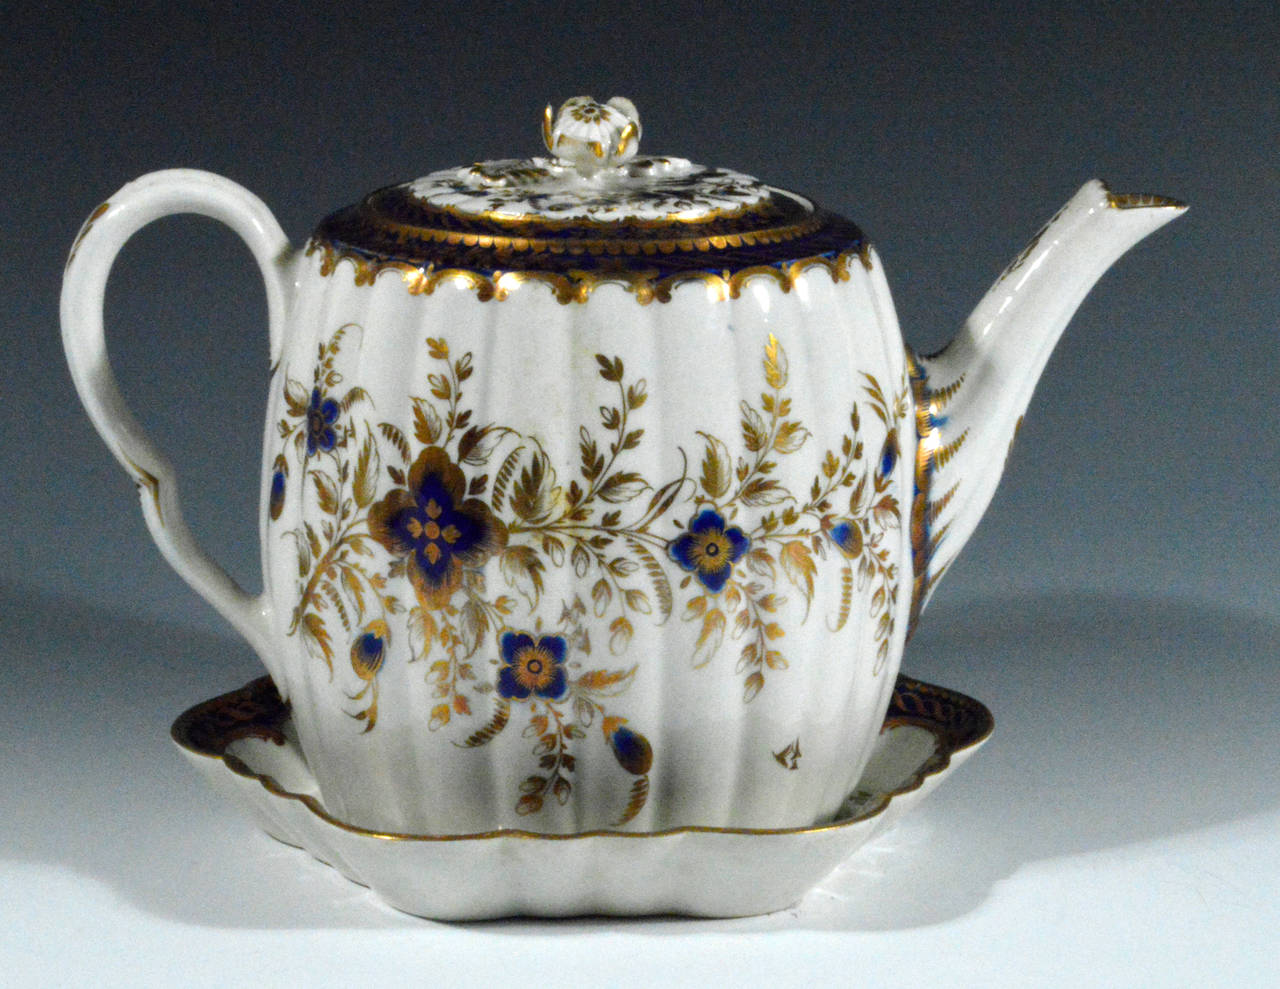 Circa 1775-85.

The tea service is painted with a mazarine blue border highlighted in gilt.  The body design consists of blue flower centers with gilt leaves and details.  

The service, which is in superb condition, consists of the following